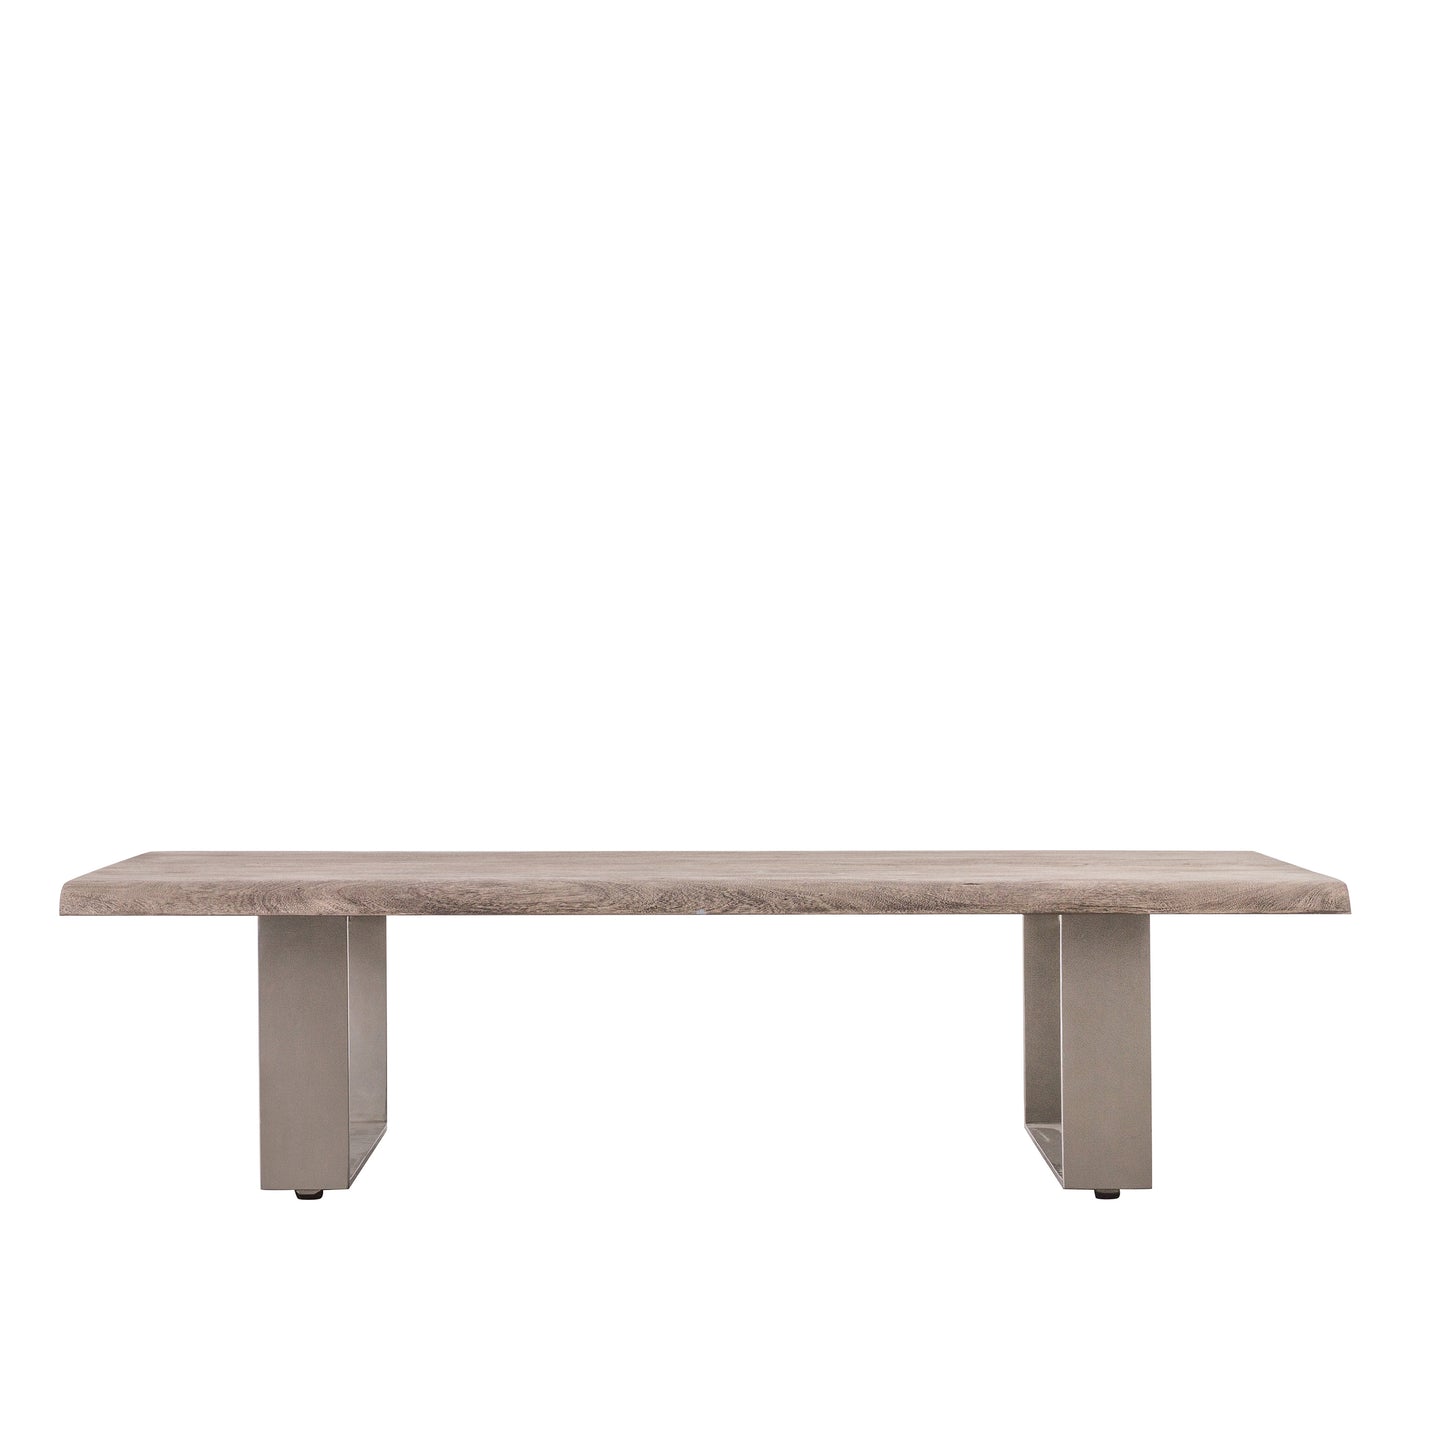 A 1400x850x350mm Southpool coffee table with a wooden top, suitable for home furniture and interior decor.